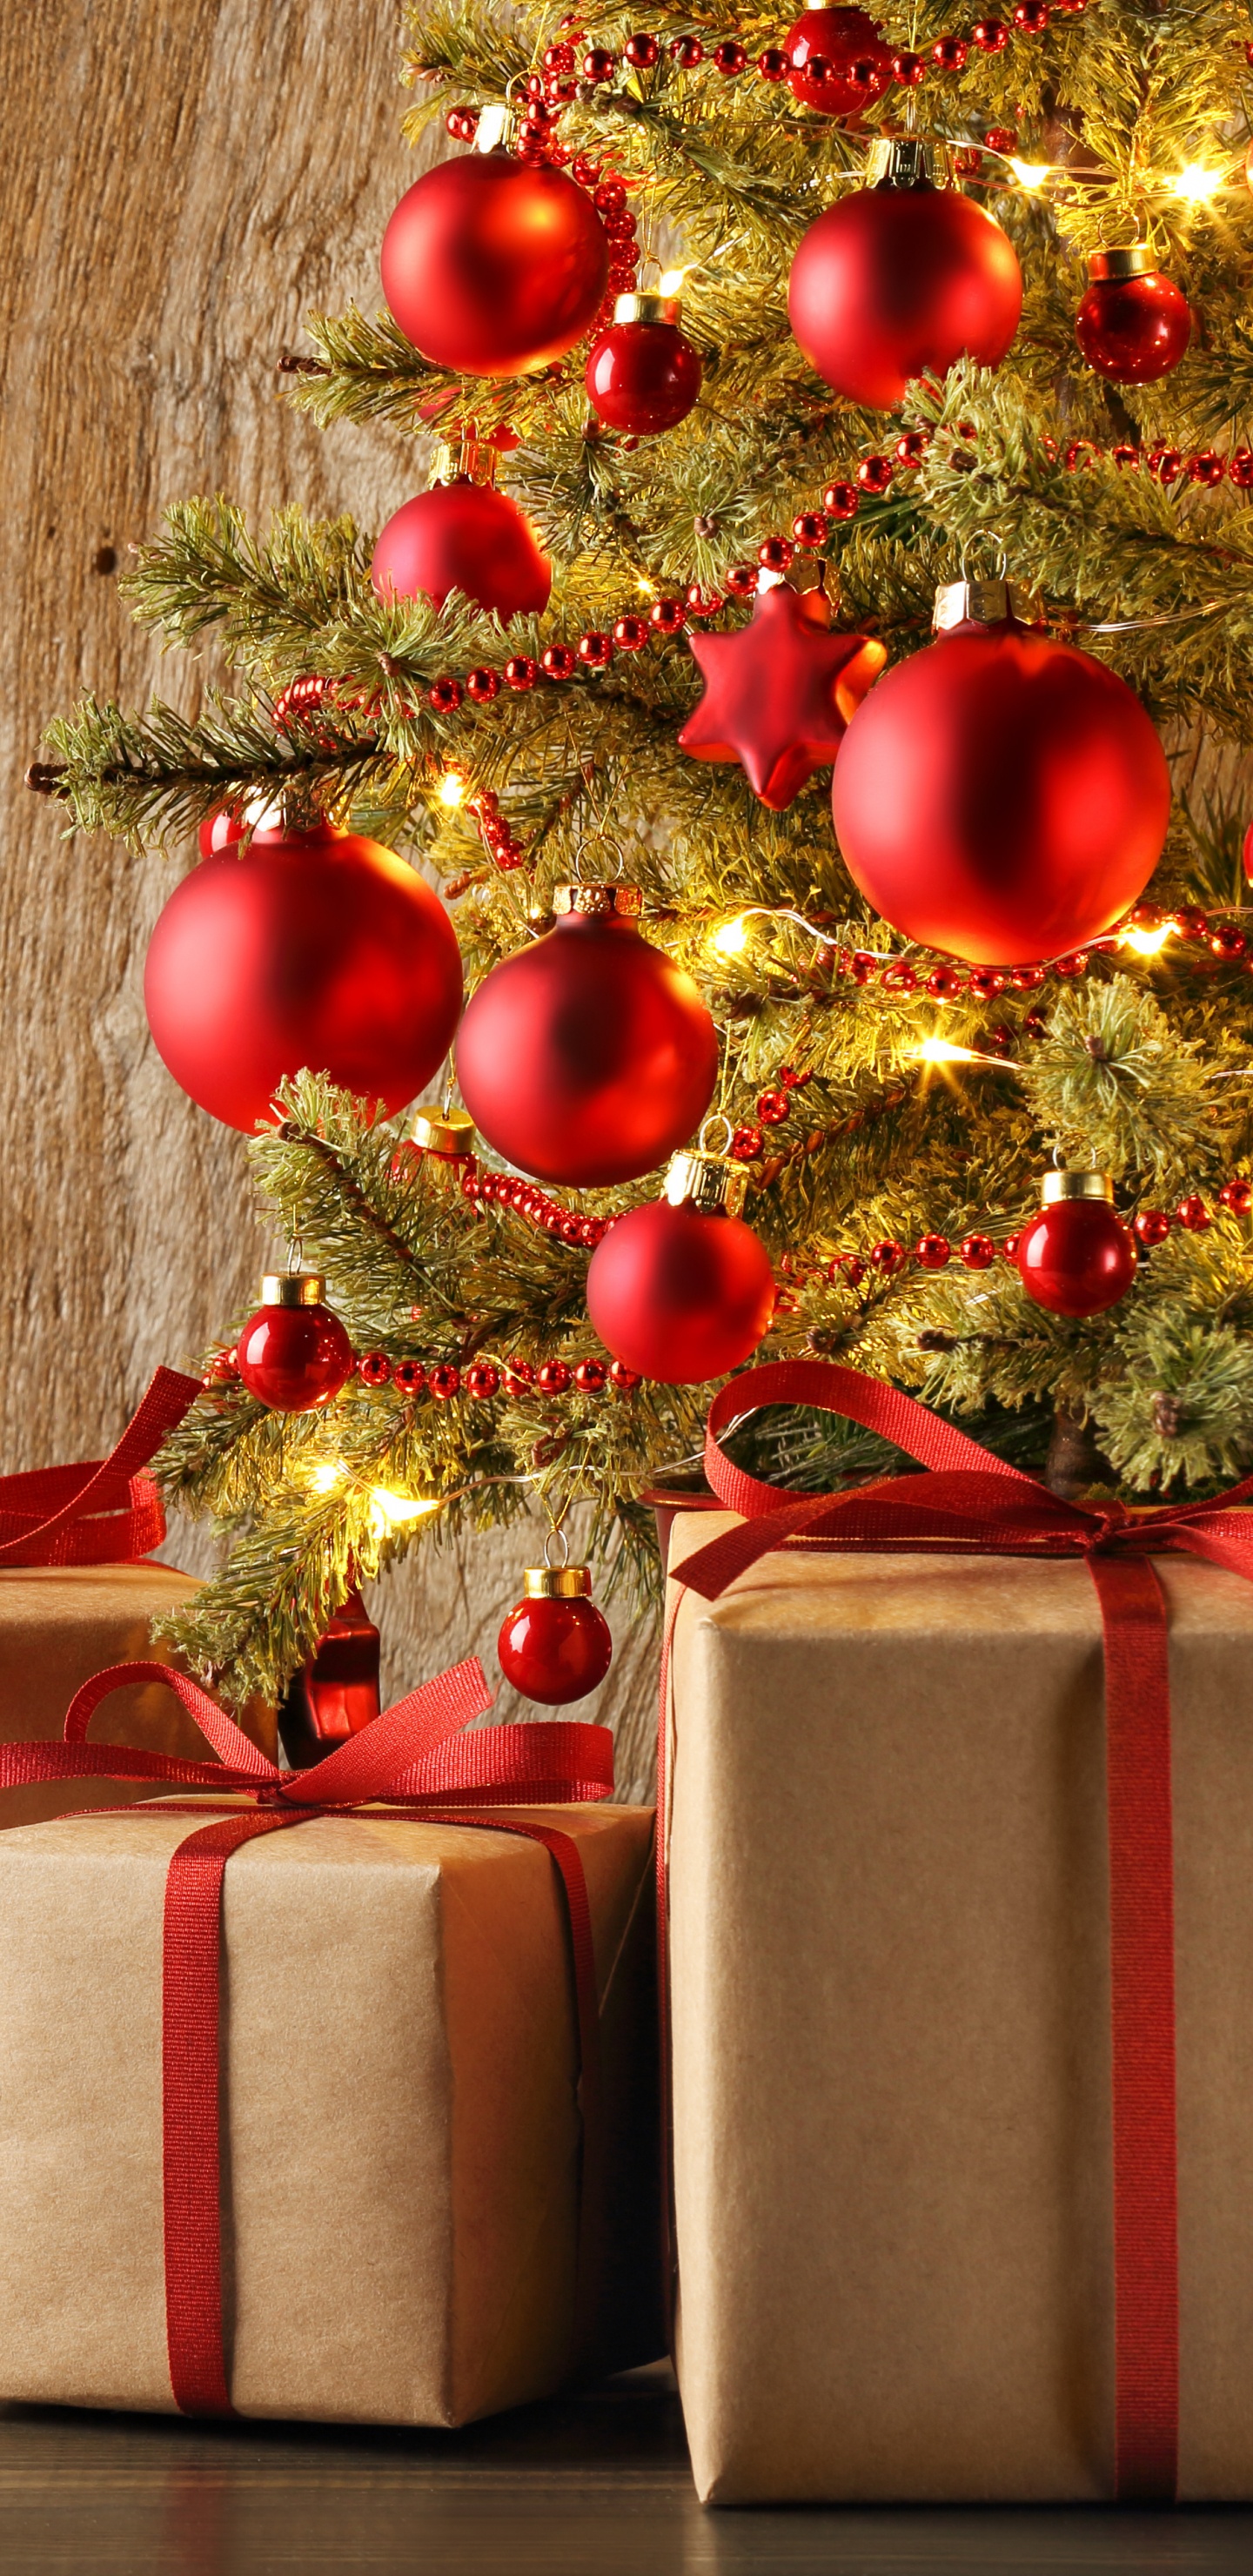 Christmas Day, Gift, Christmas Ornament, Gift Wrapping, New Year. Wallpaper in 1440x2960 Resolution